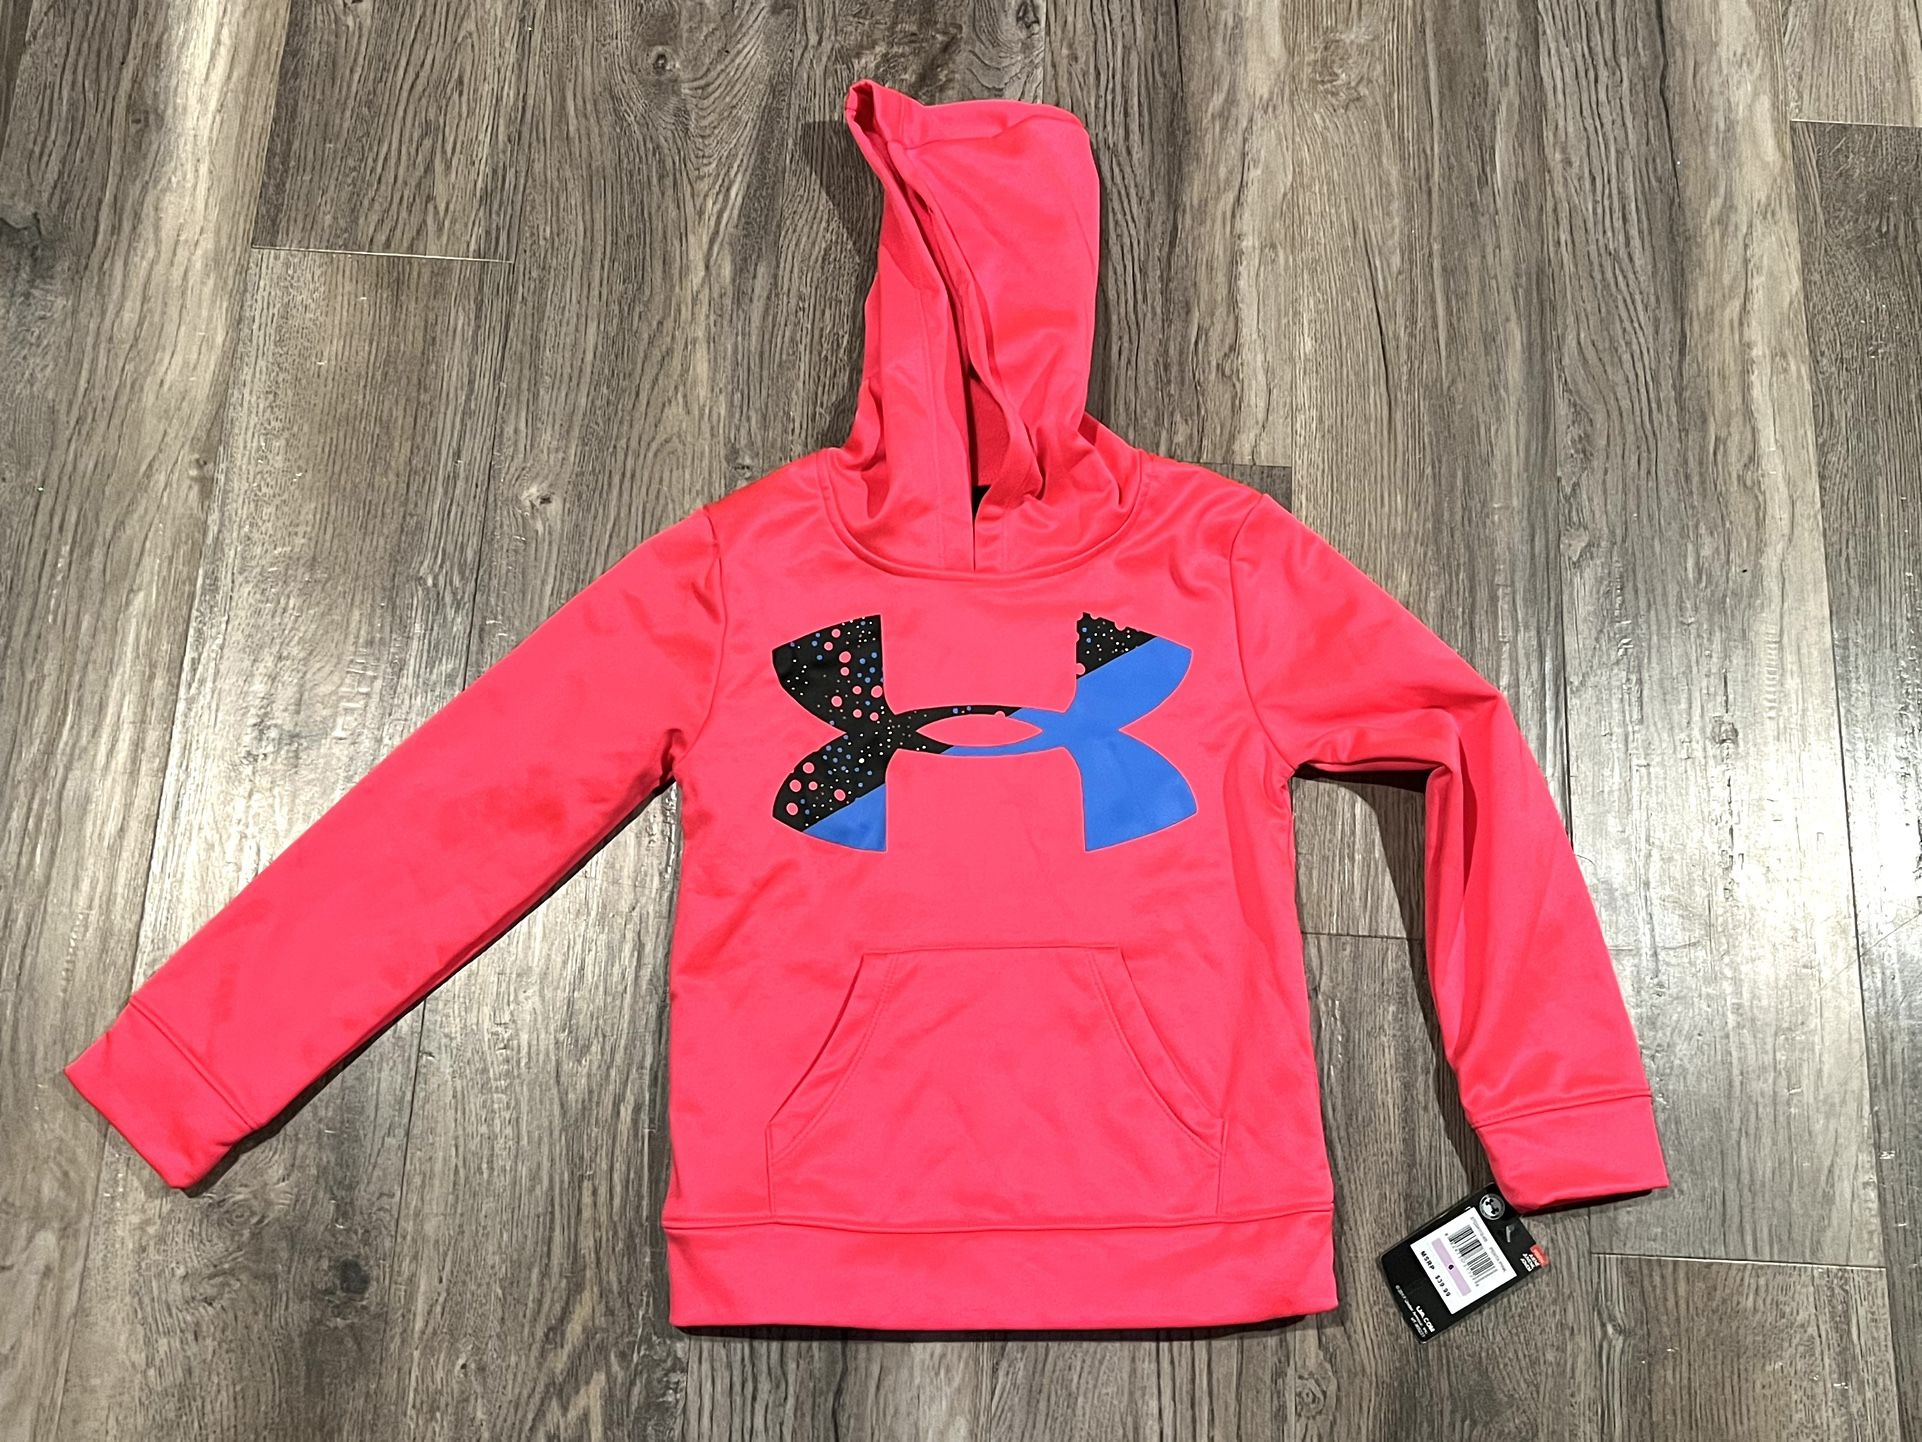 NEW WITH TAG - Girls Neon Pink Under Armour Hoodie. Size 6. SEE NOTE!